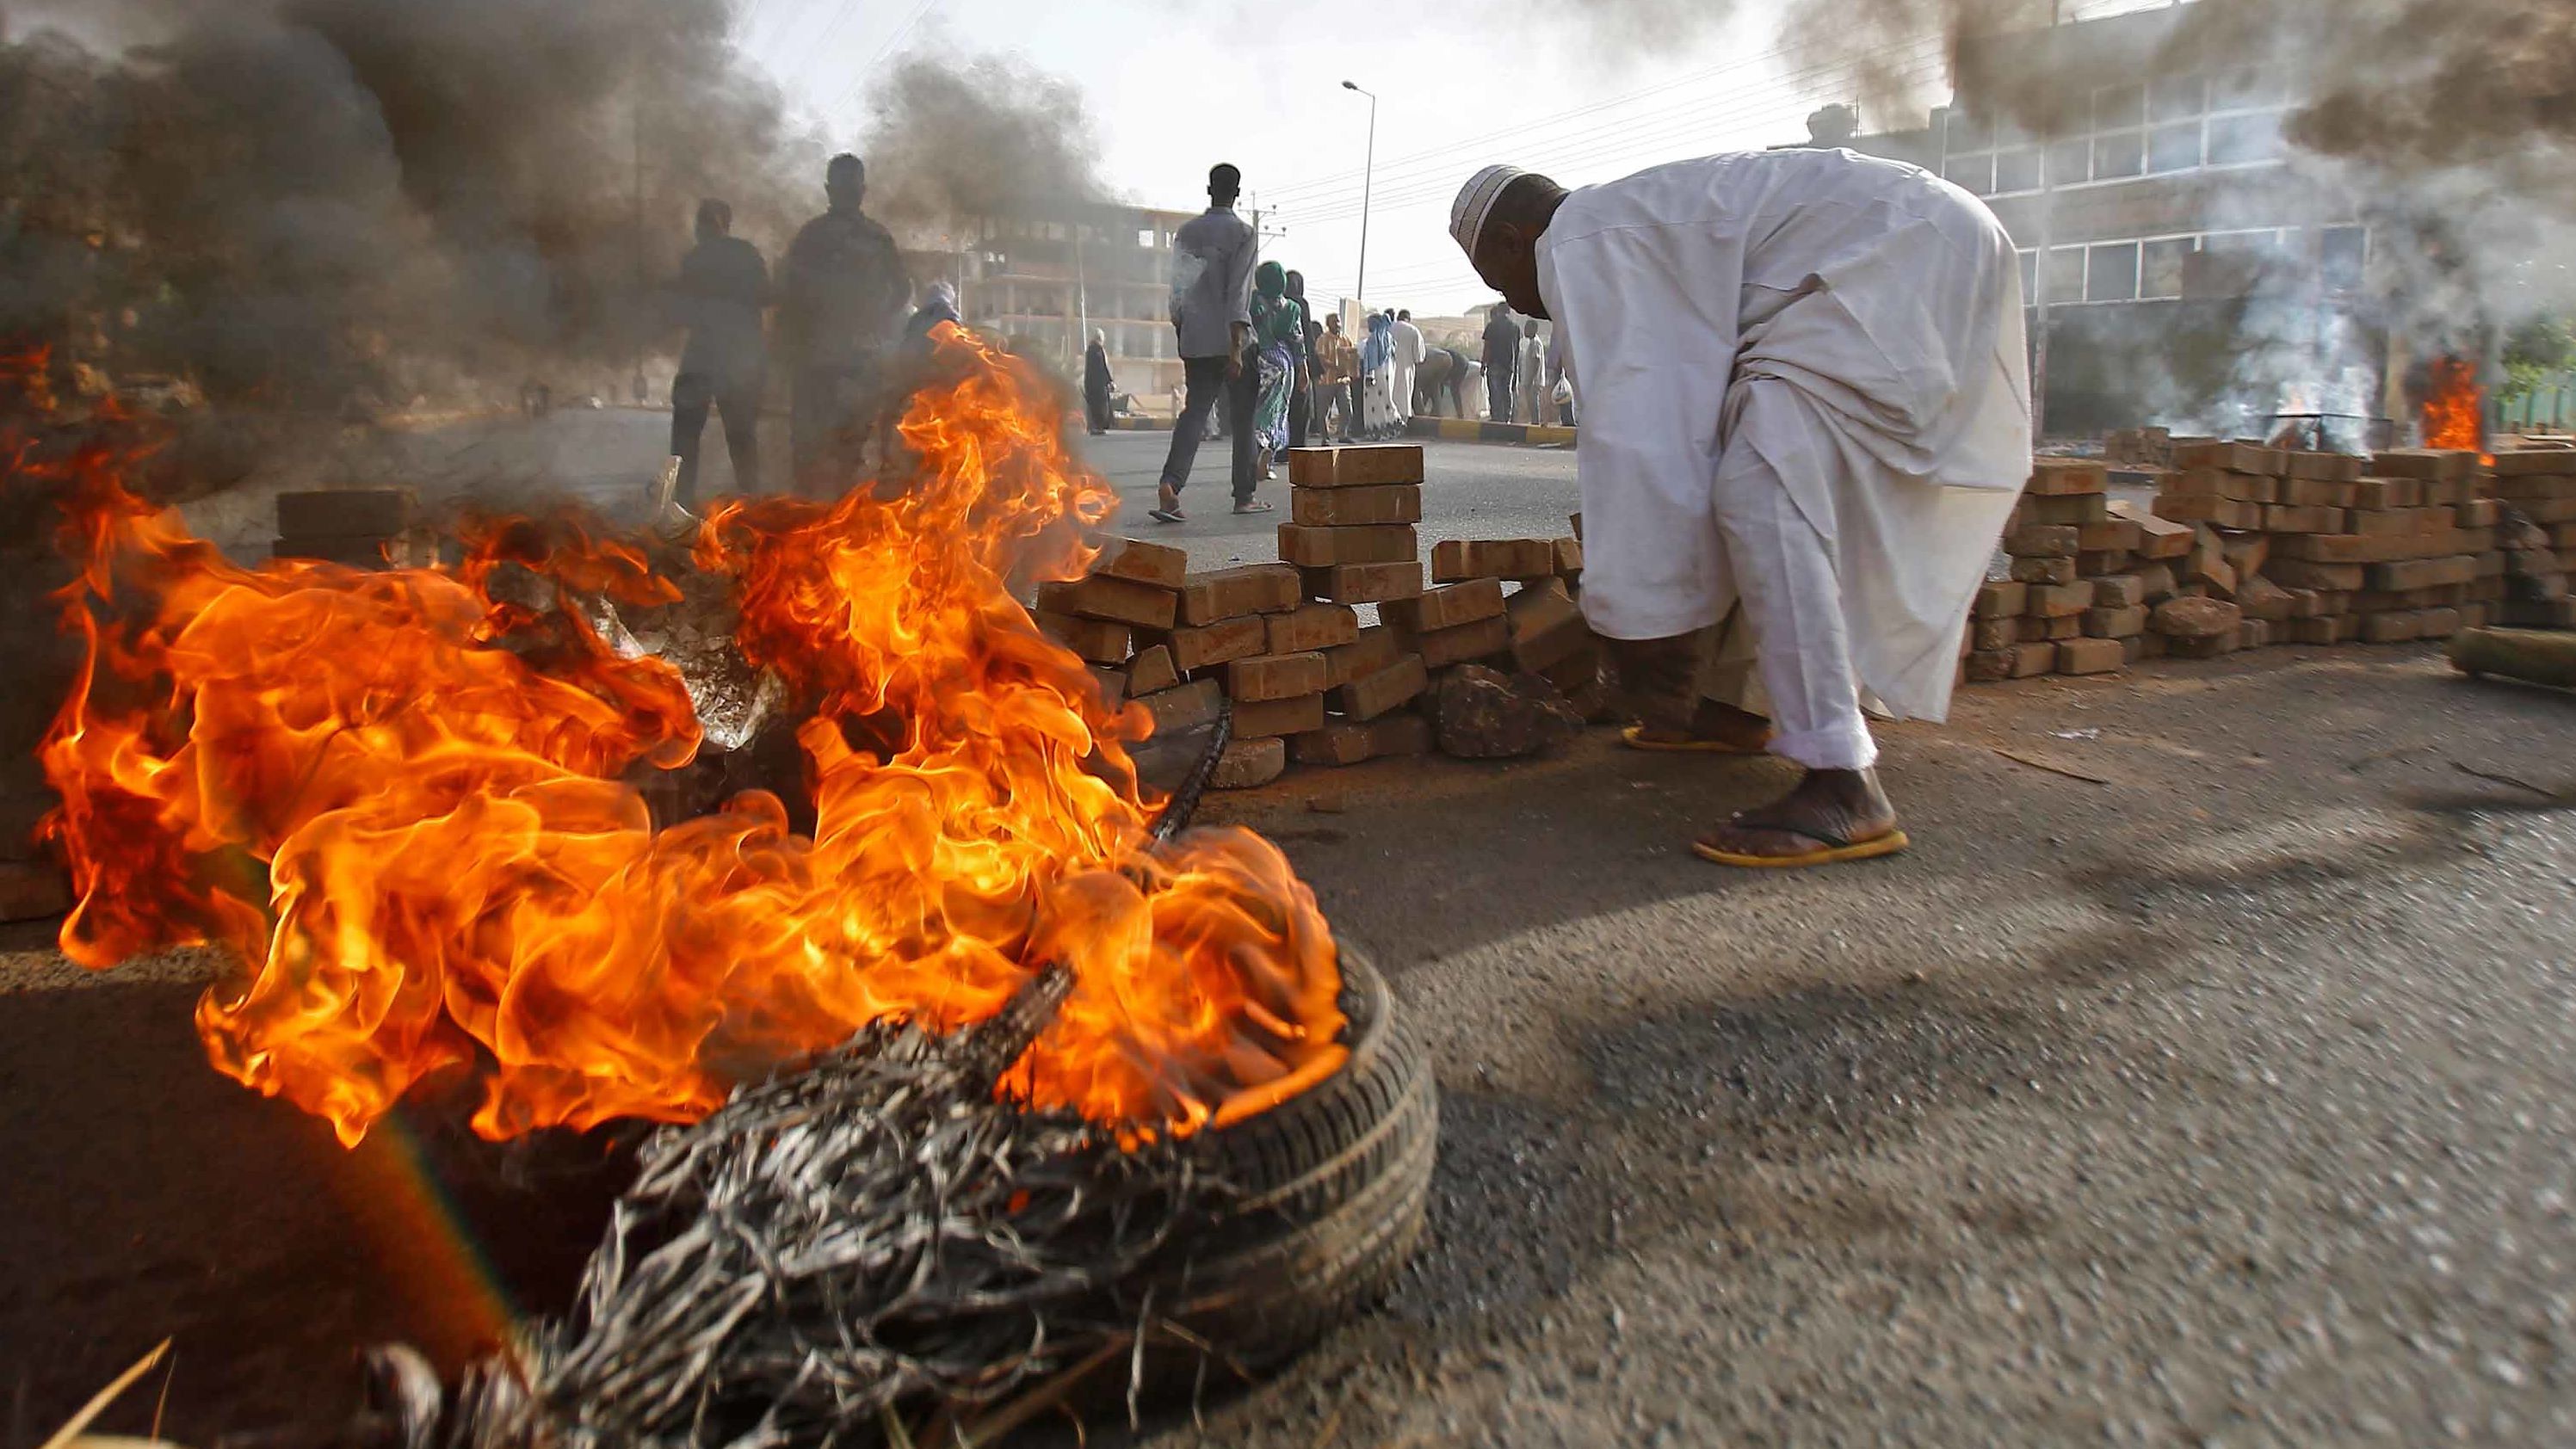 Protesters block a street with bricks and burning tires as military forces attempt to disperse a sit-in outside the army headquarters in Khartoum, Sudan, on Monday, June 3. More than <a href="https://edition.cnn.com/2019/06/05/africa/sudan-death-toll-intl/index.html" target="_blank">100 protesters were killed</a> when the military opened fire to break up the sit-in, according to a local doctors' union.